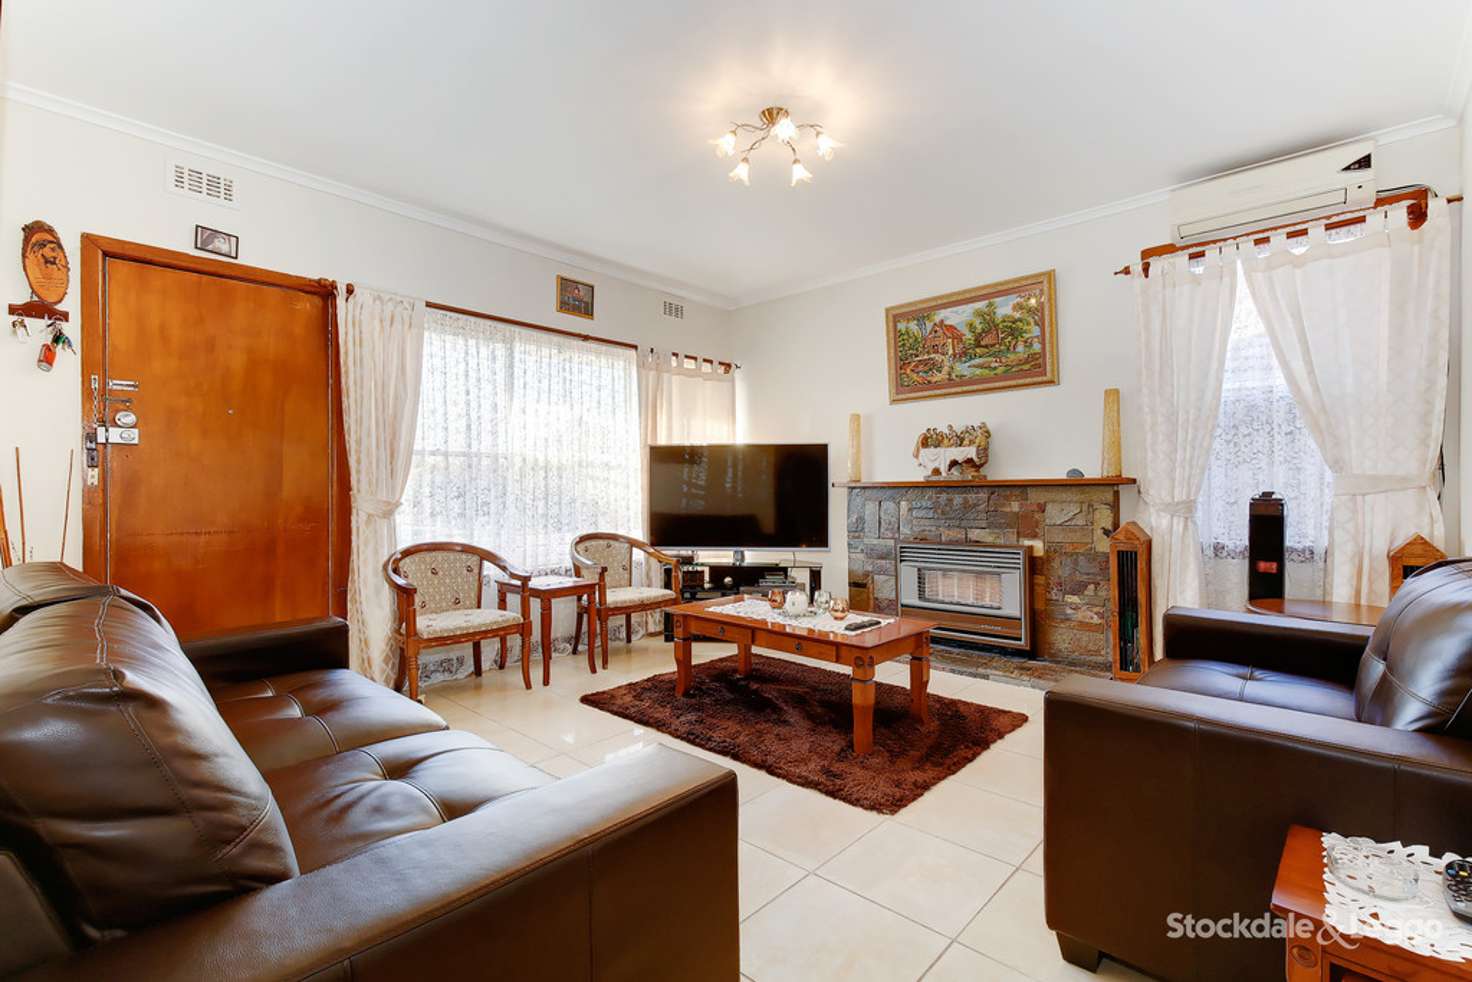 Main view of Homely house listing, 15 Stevenson St, Broadmeadows VIC 3047